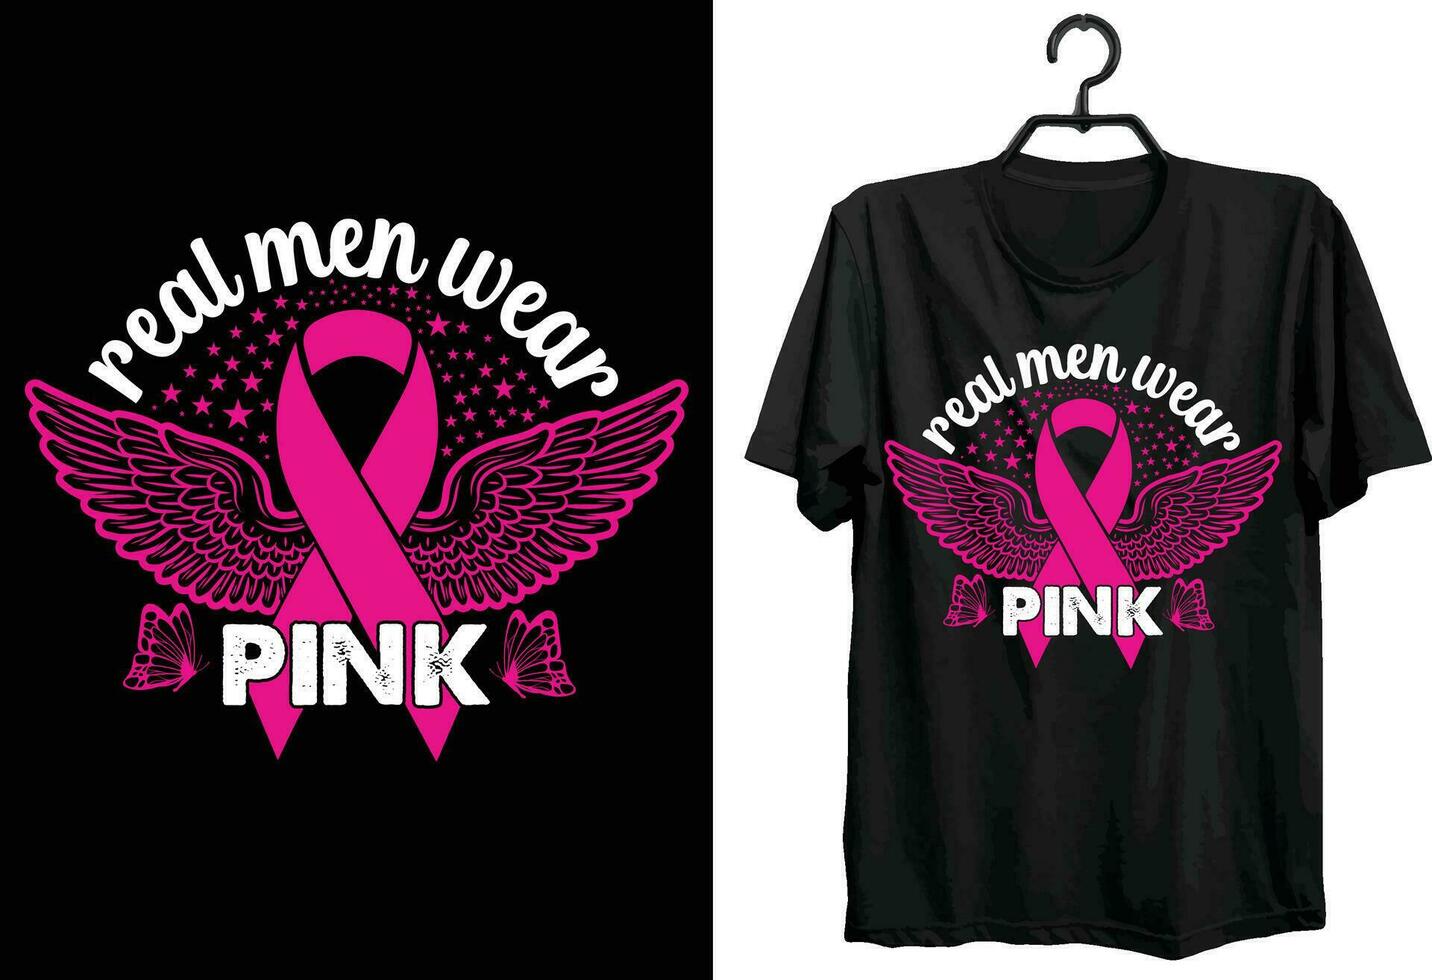 Breast Cancer T-shirt Design. World Breast Cancer Day t-shirt design. custom, Typography And Vector t-shirt design.